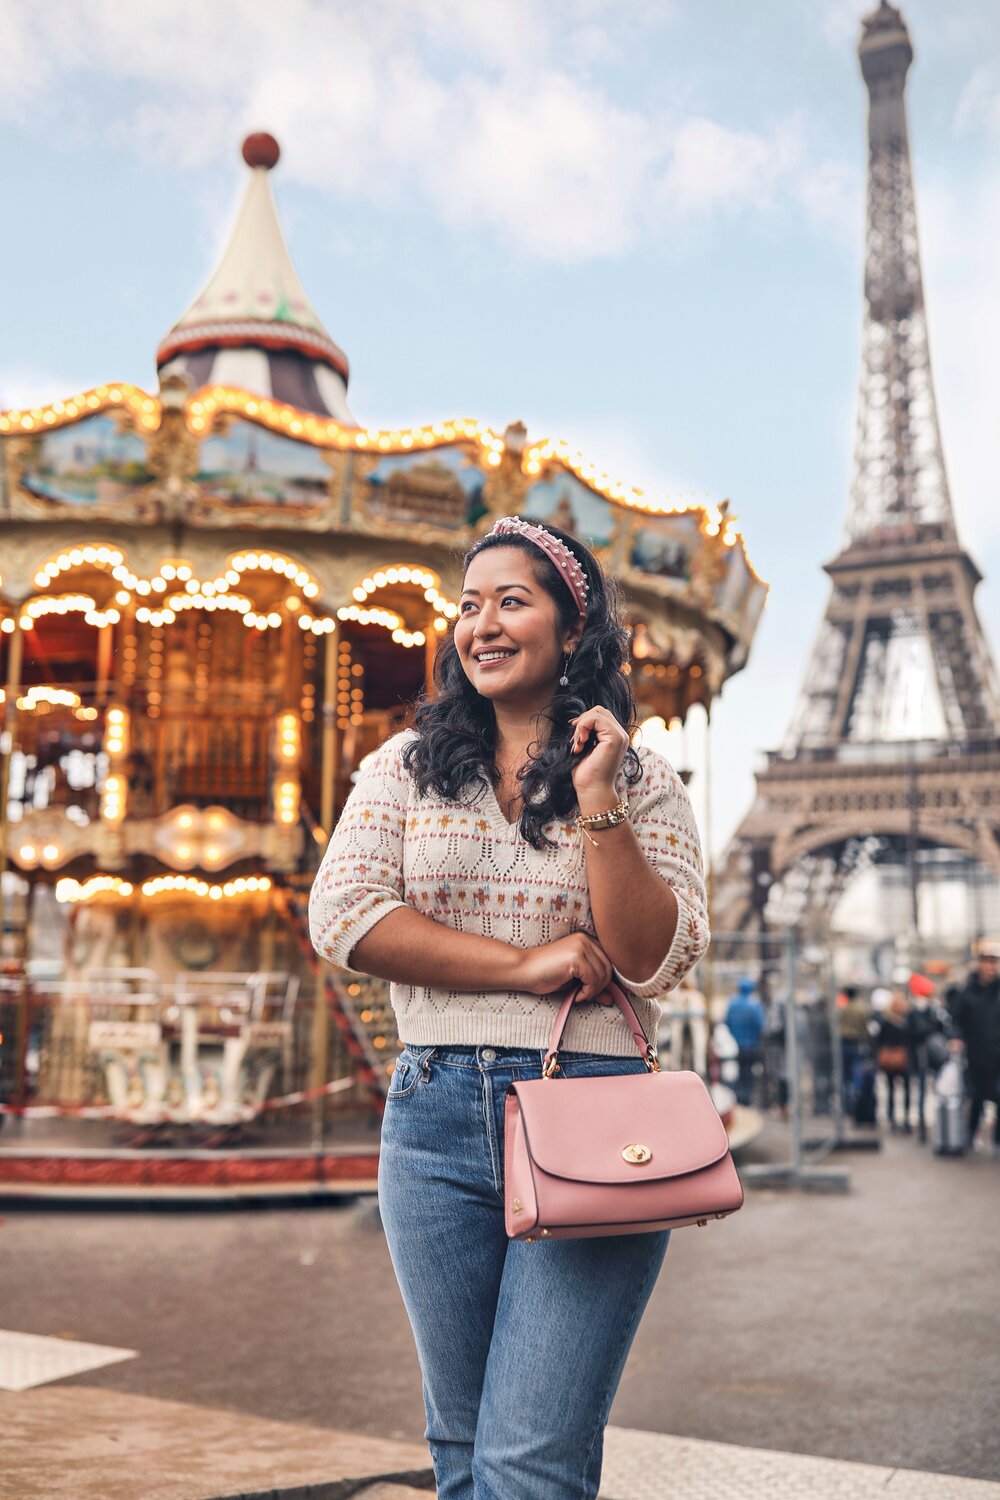 Carousel at the base of the Eiffel Tower Paris Instagramable Photo Location – Pink Purse and Zara Sweater 